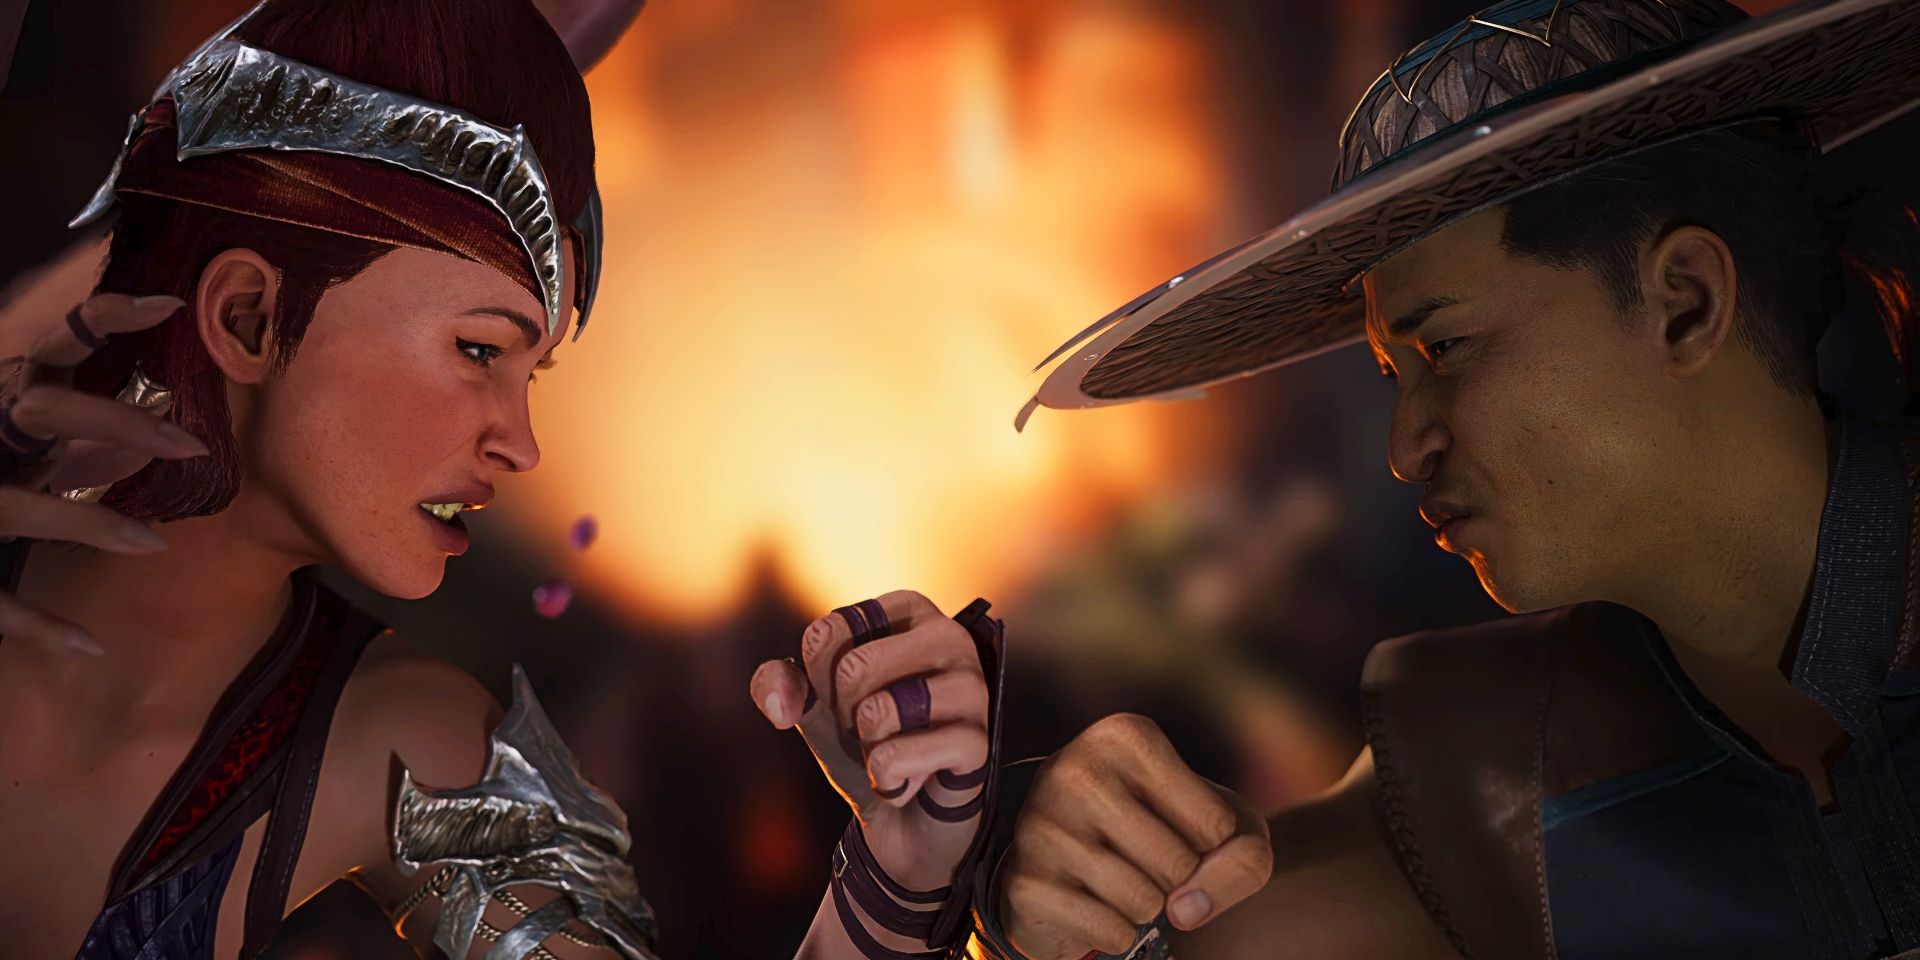 Nitara and Kung Lao stand face-to-face with clenched fists in a screenshot from Mortal Kombat 1.